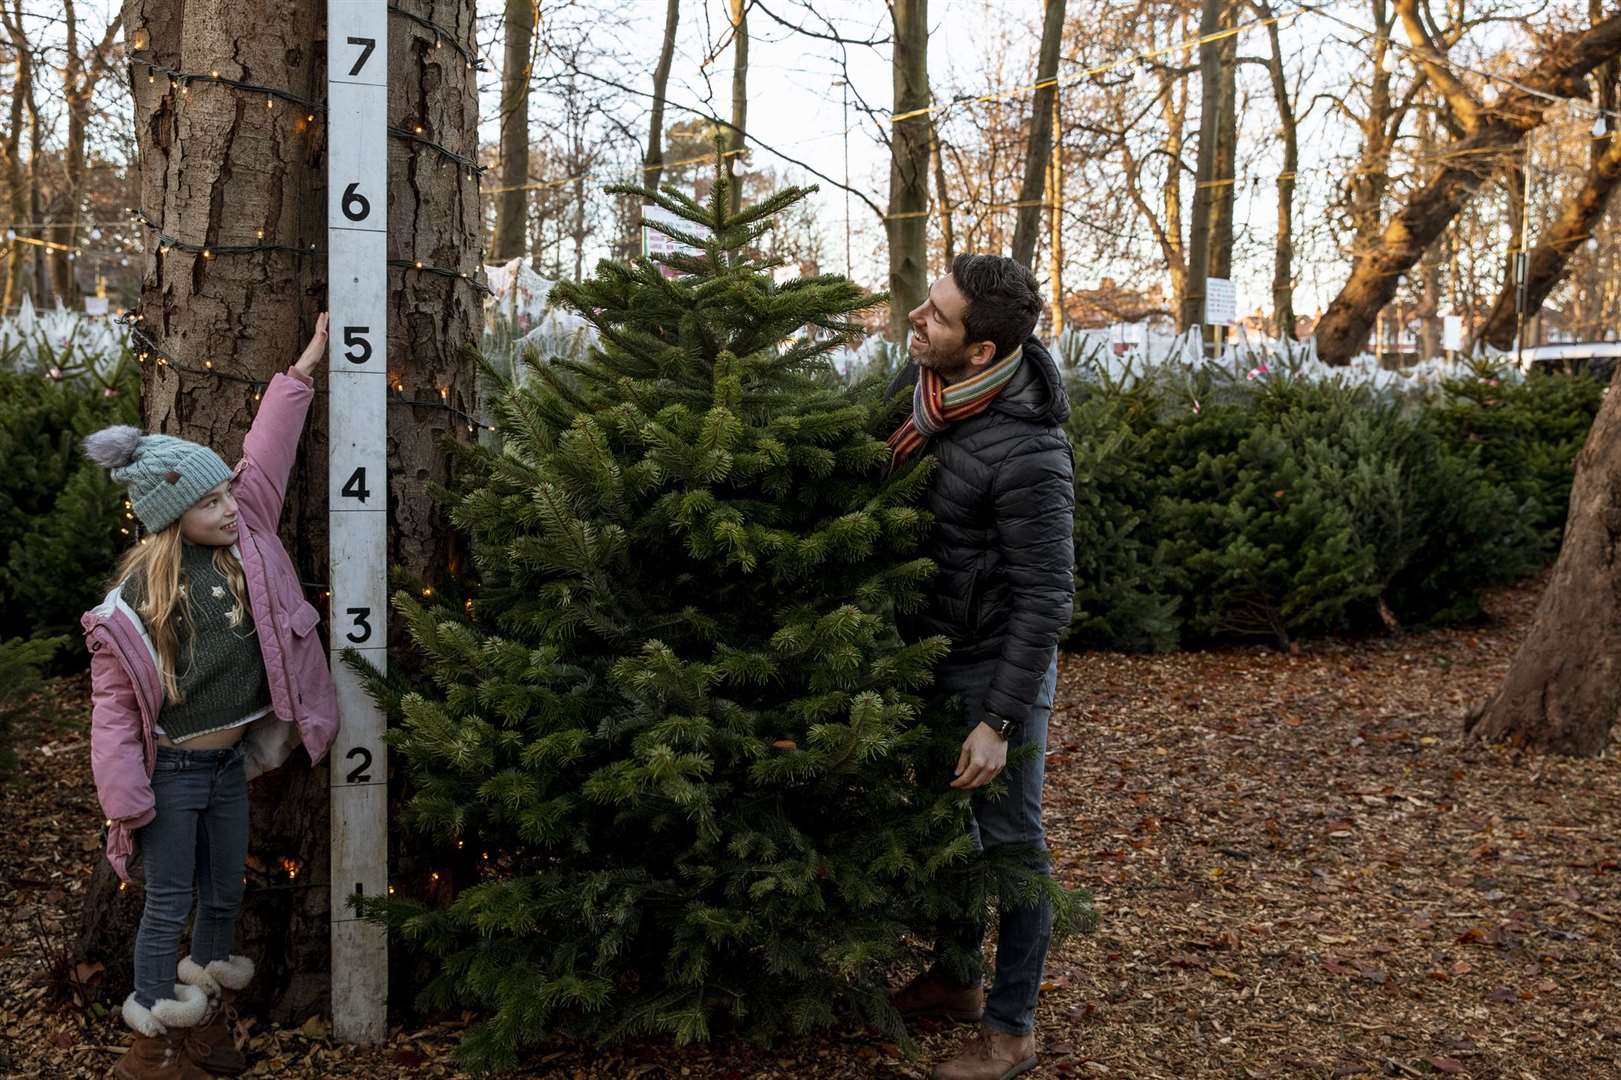 How tall do you want your tree? We have advice for you